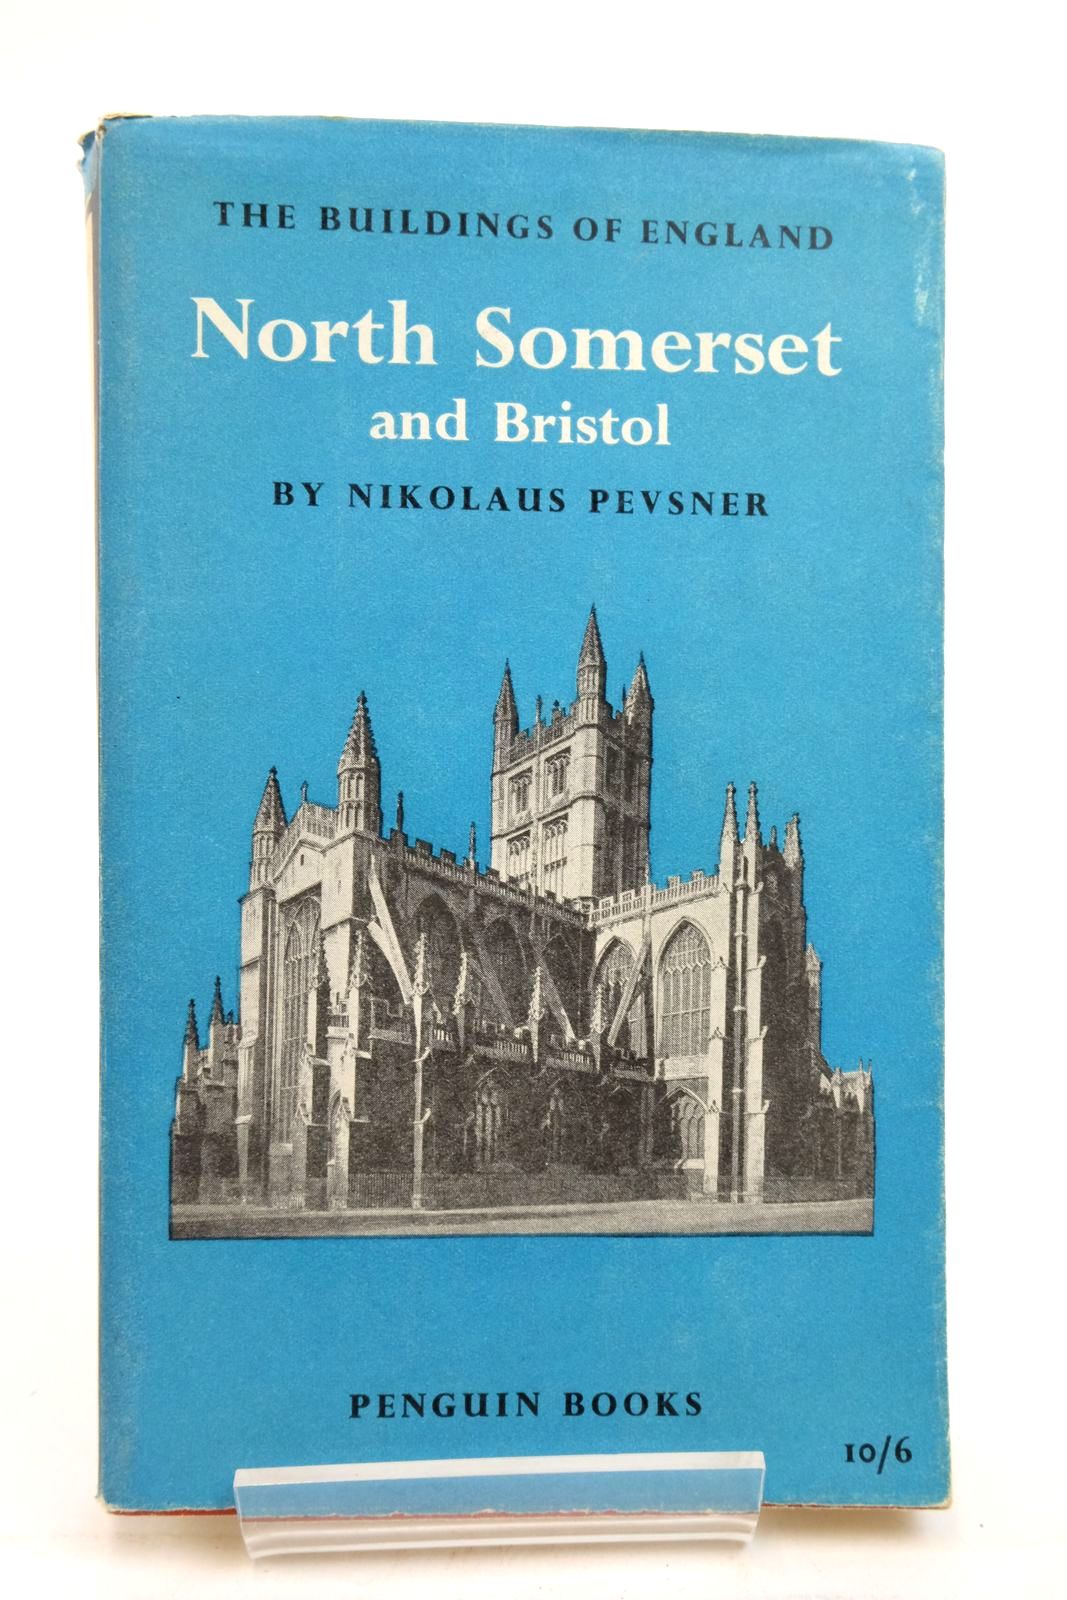 Photo of NORTH SOMERSET AND BRISTOL (BUILDINGS OF ENGLAND) written by Pevsner, Nikolaus published by Penguin (STOCK CODE: 2137632)  for sale by Stella & Rose's Books